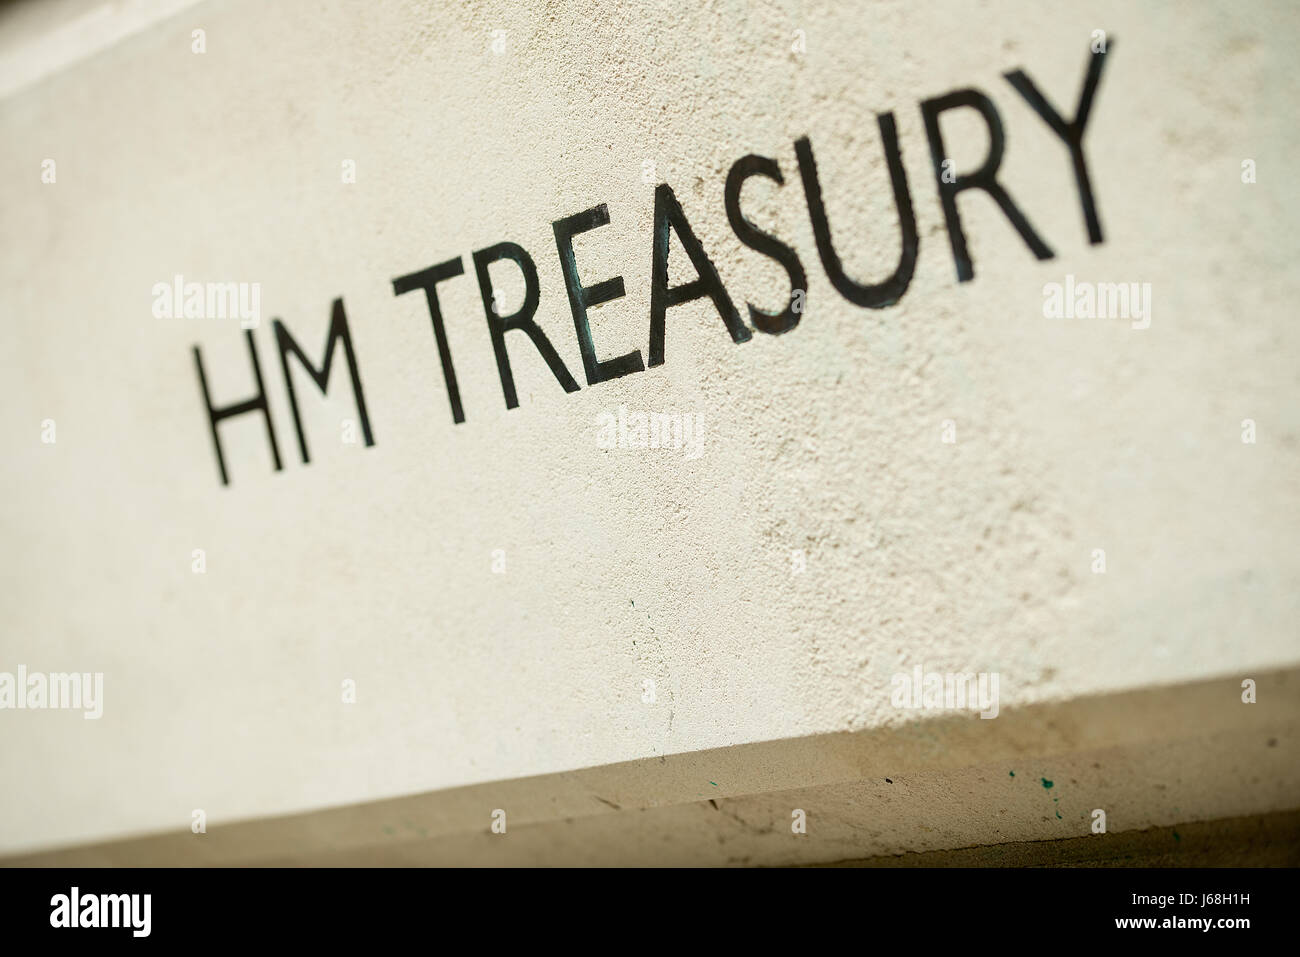 Angled view of HM TREASURY sign on a building exterior in central London, UK. Stock Photo